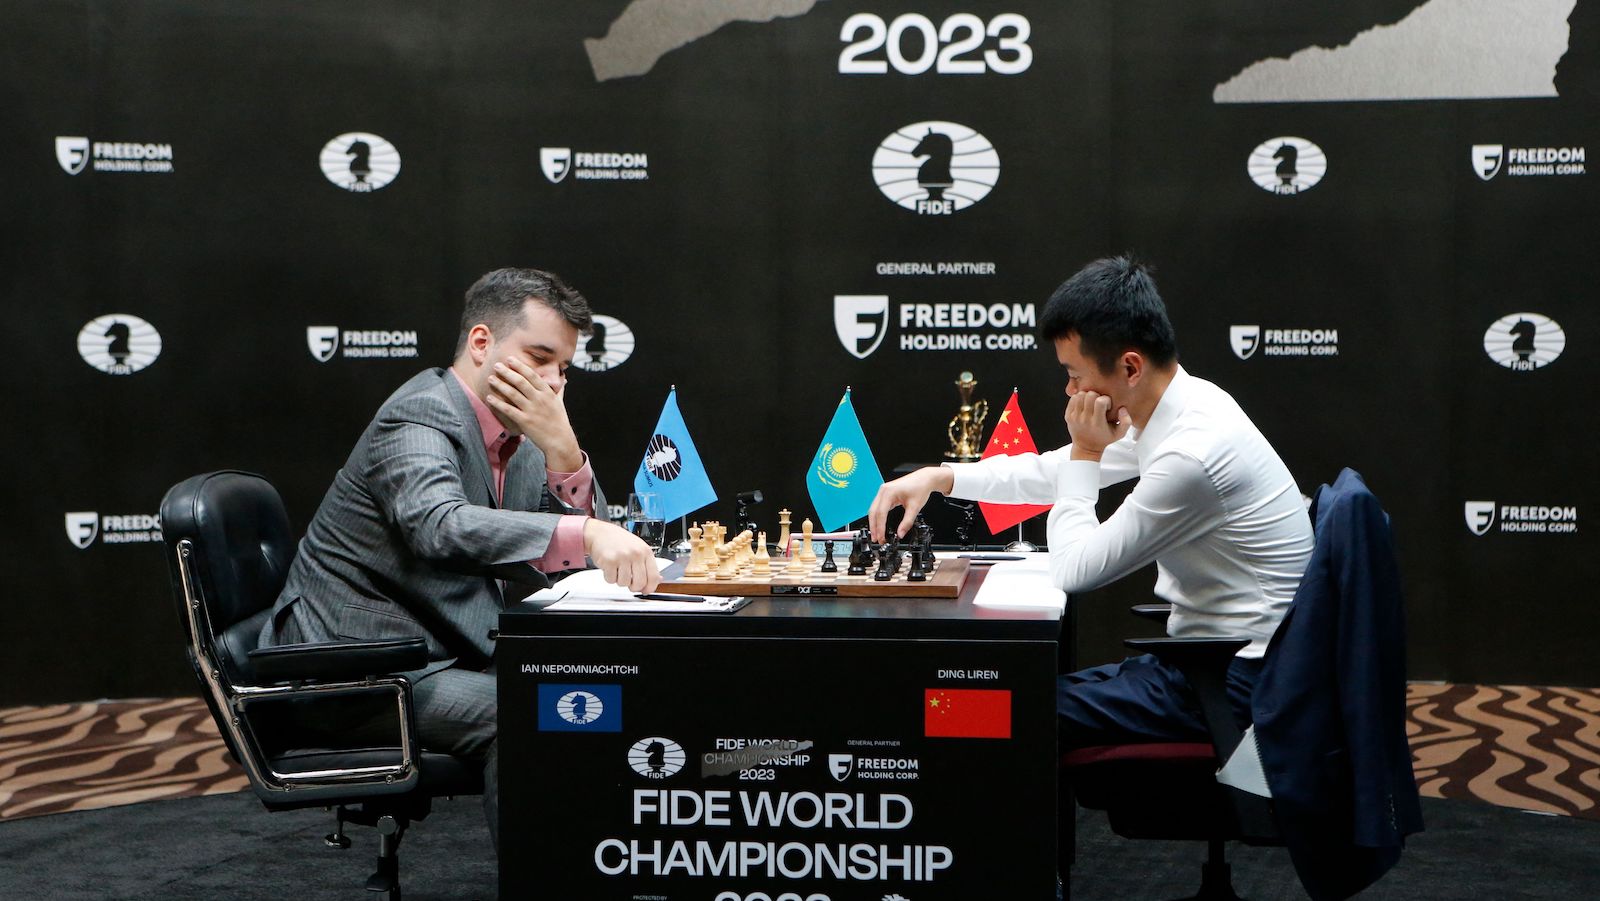 2022 Candidates Round 1: A confident start for Nepomniachtchi and